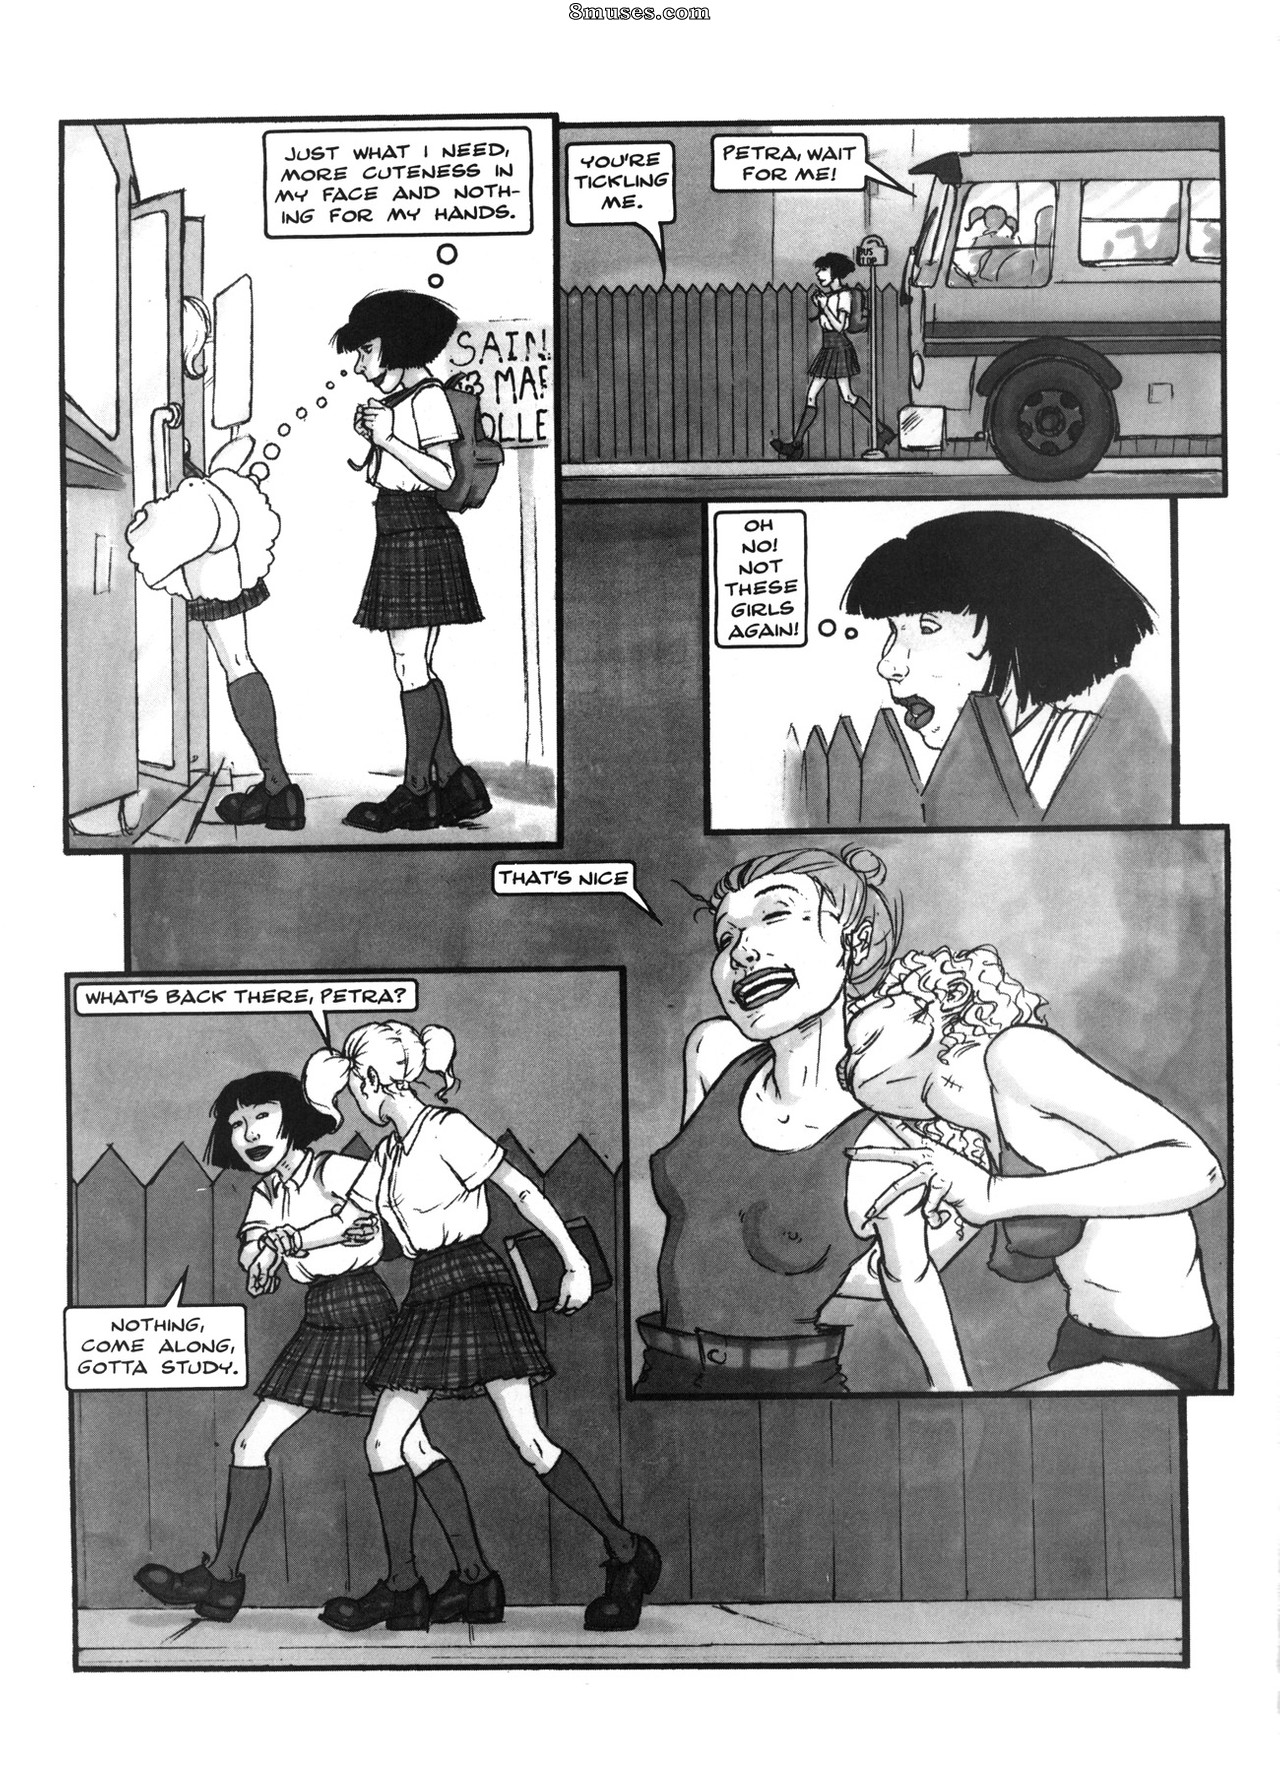 College Lesbian Sex Animation - The Adventures of a Lesbian College School Girl Issue 1 - 8muses Comics -  Sex Comics and Porn Cartoons